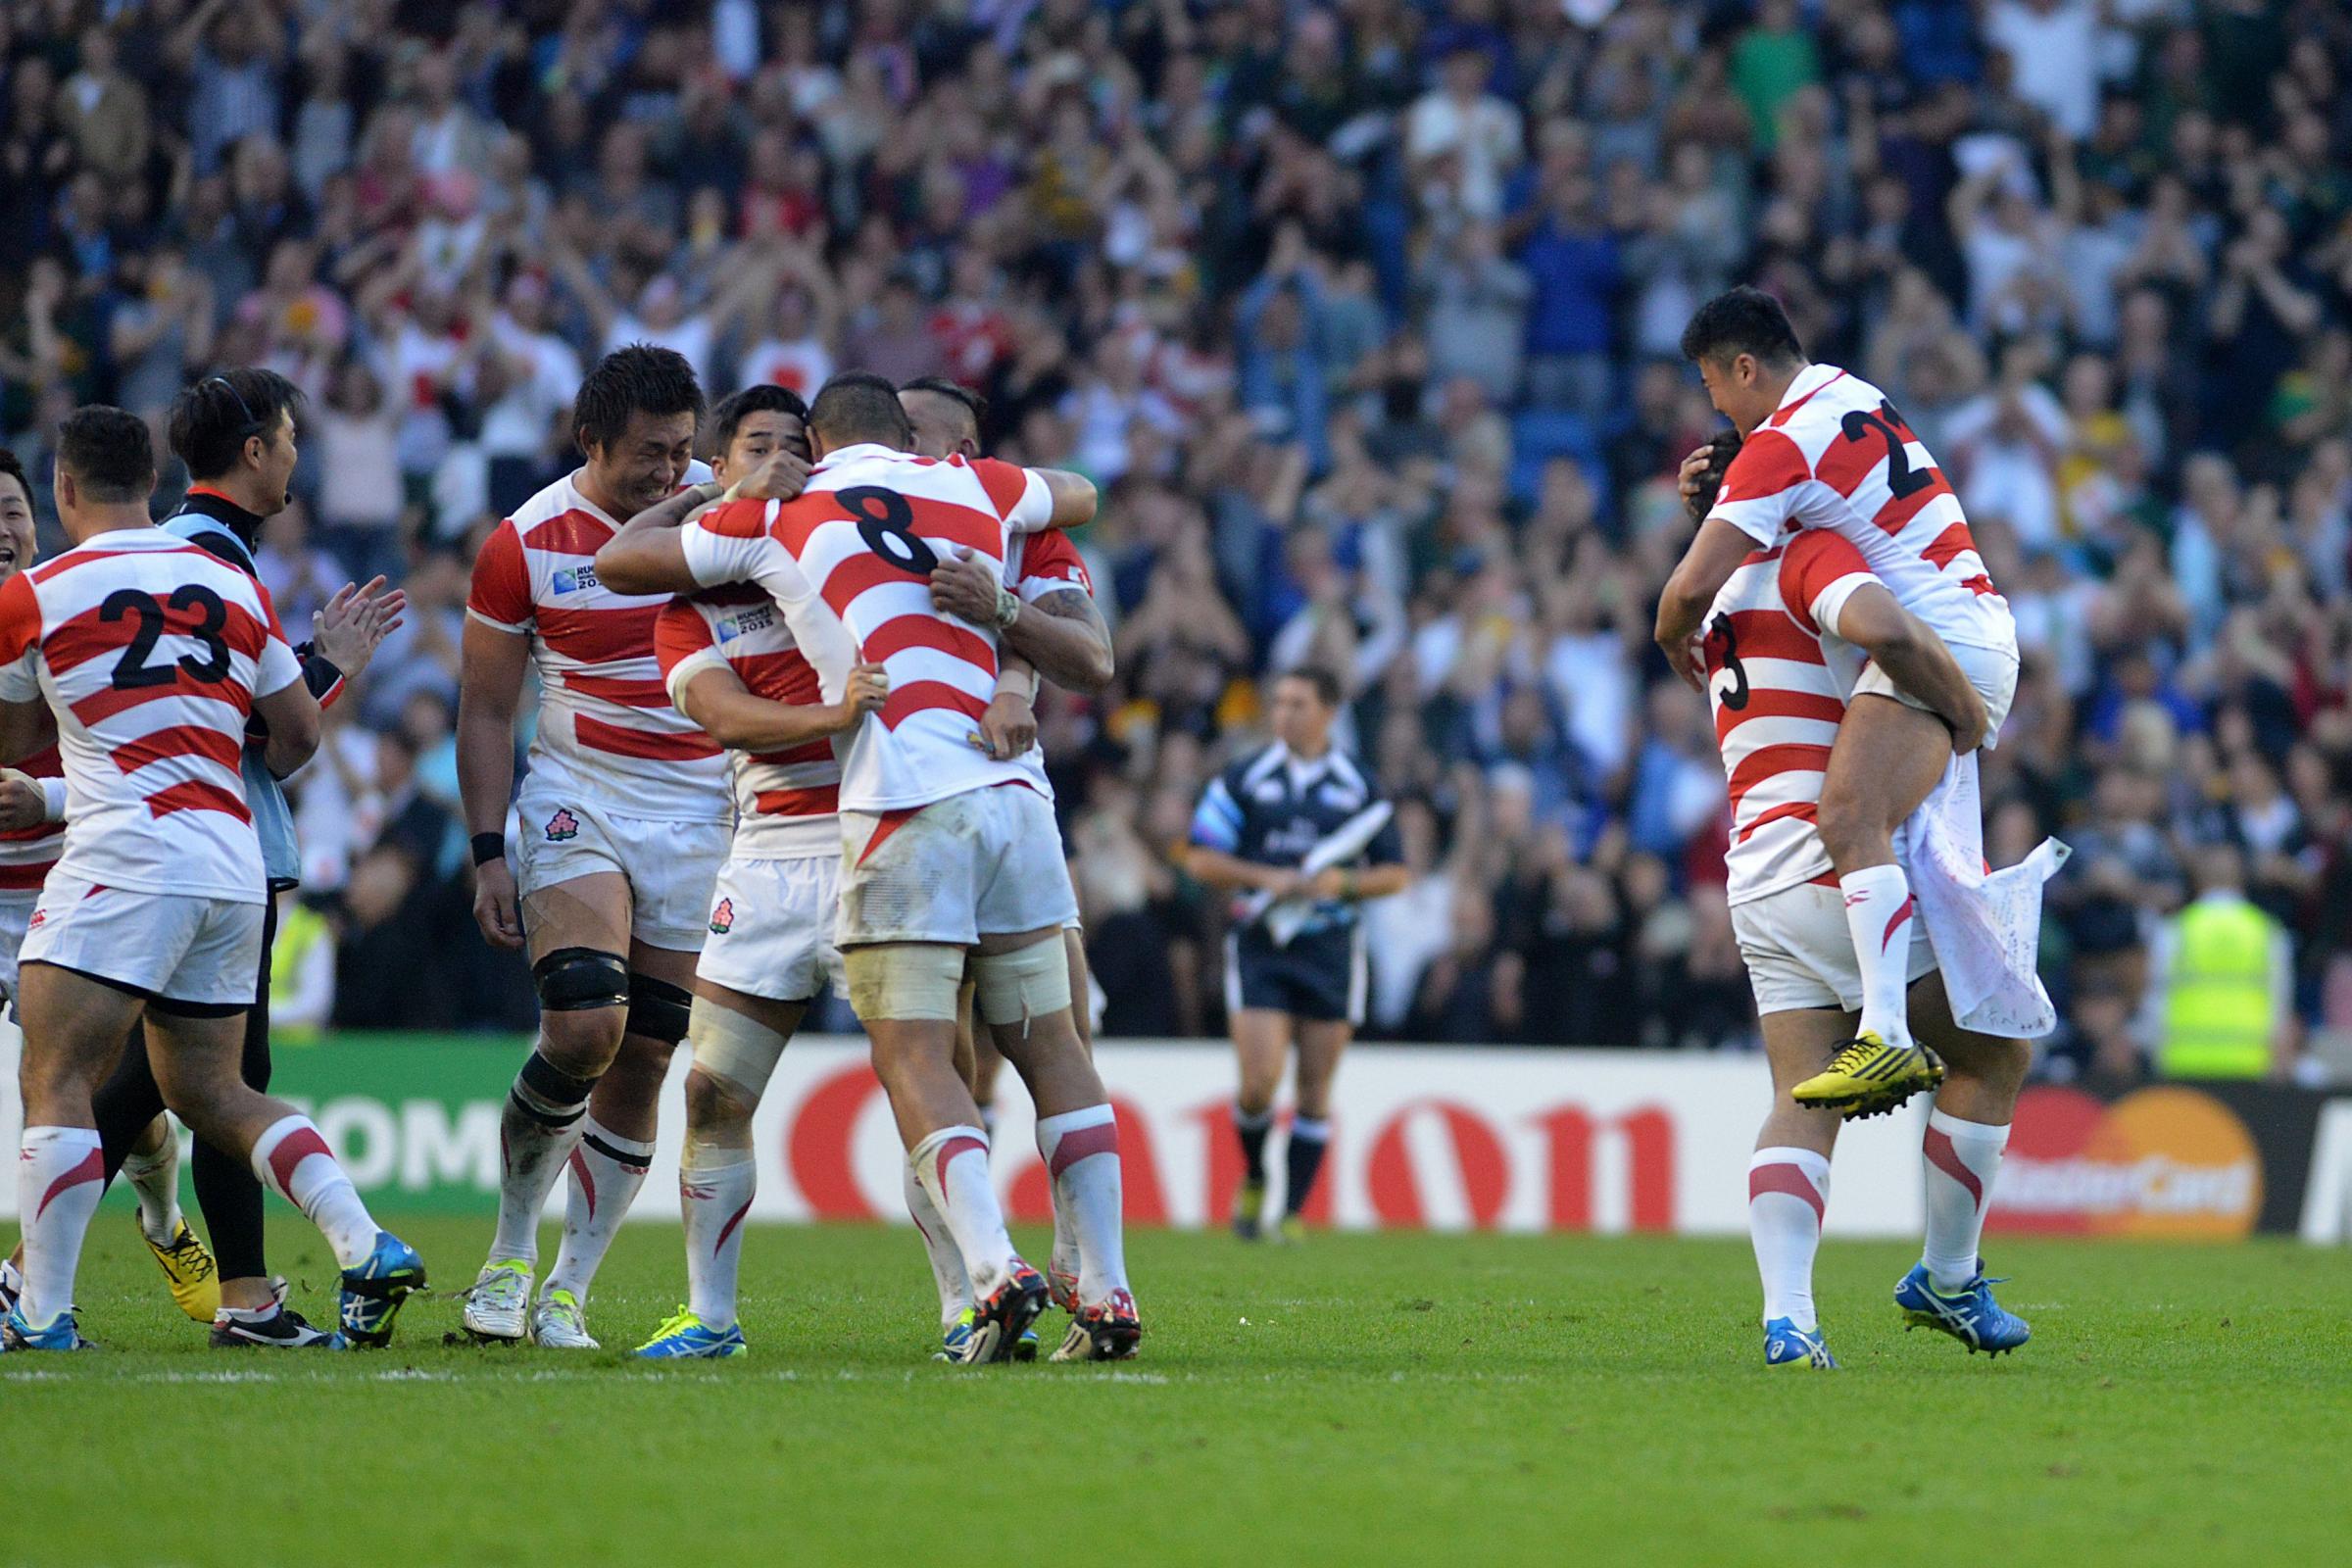 A look back at Japan beat South Africa at the 2015 Rugby World Cup